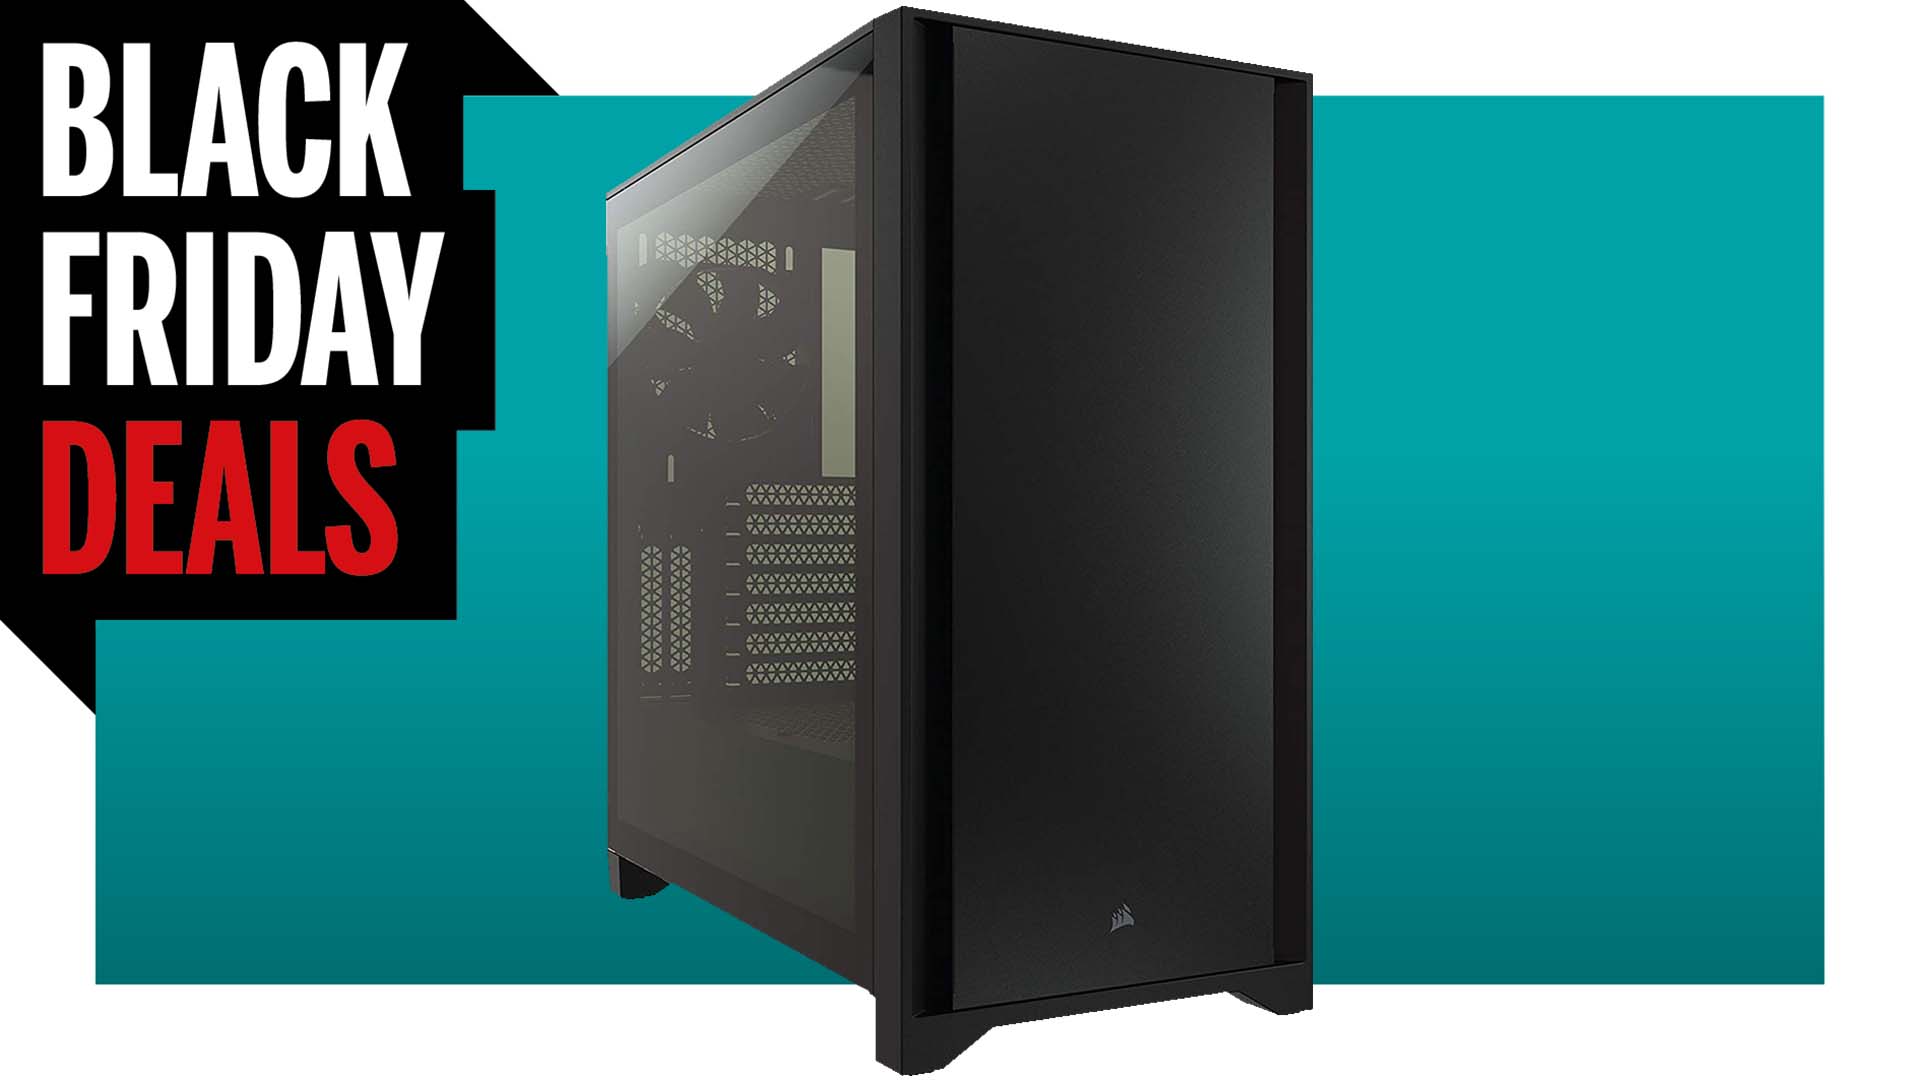  Get 20% off this Corsair 4000D PC Case right now 